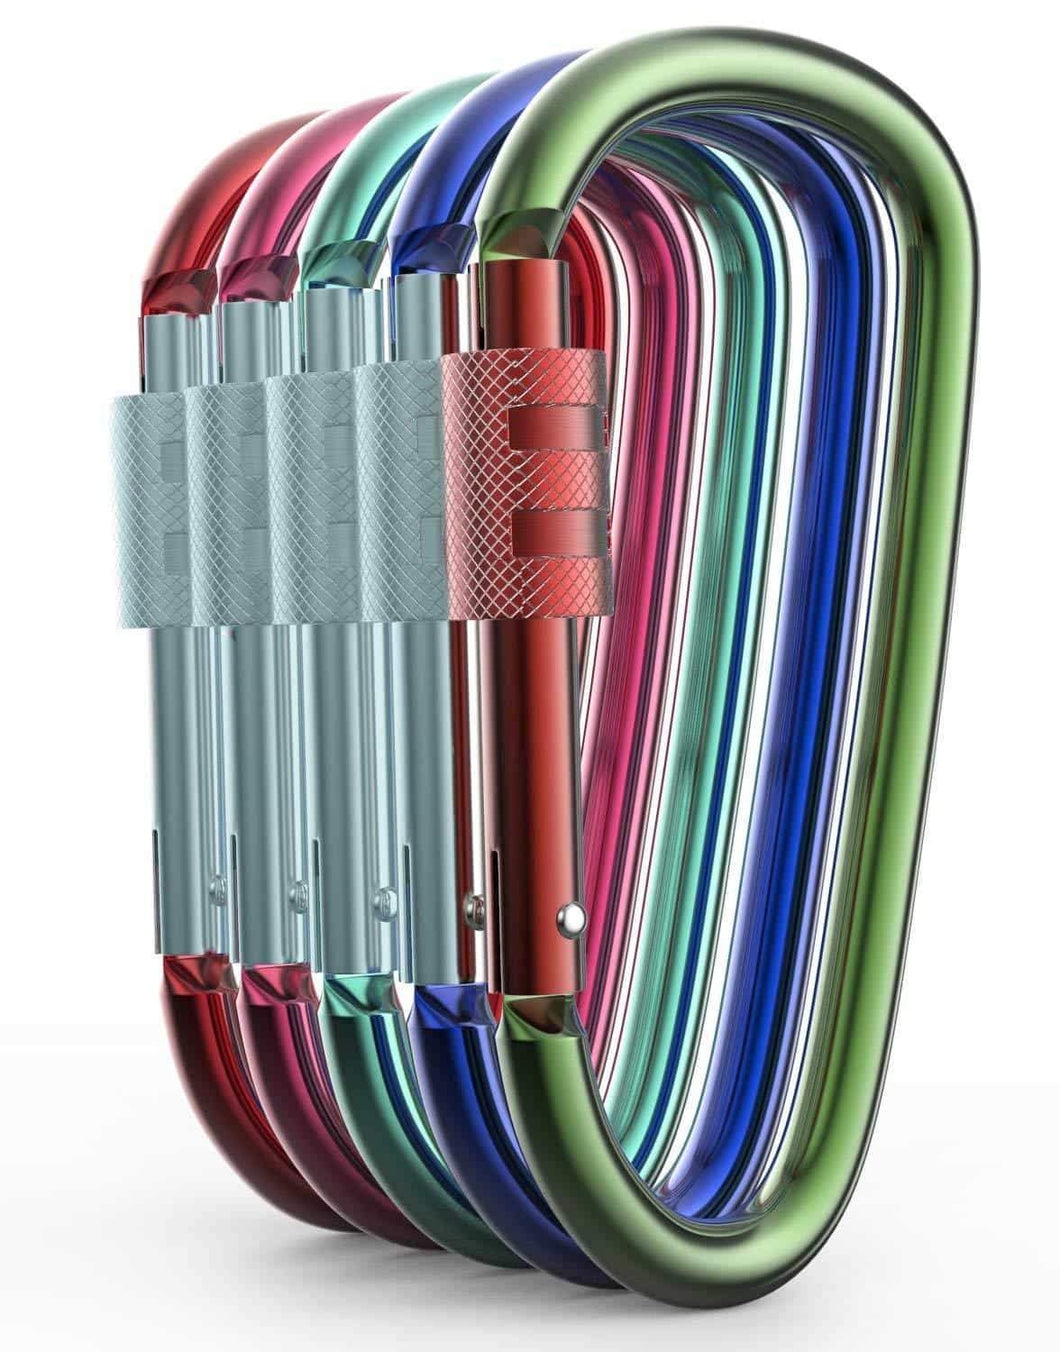 Gold Lion Gear Aluminum Carabiner D Shape Buckle Pack, Keychain Clip, Spring Snap Key Chain Clip Hook Screw Gate Buckle -Pack of Assorted Color Carabiners (Multi-Color, 10 Locking Carabiners)